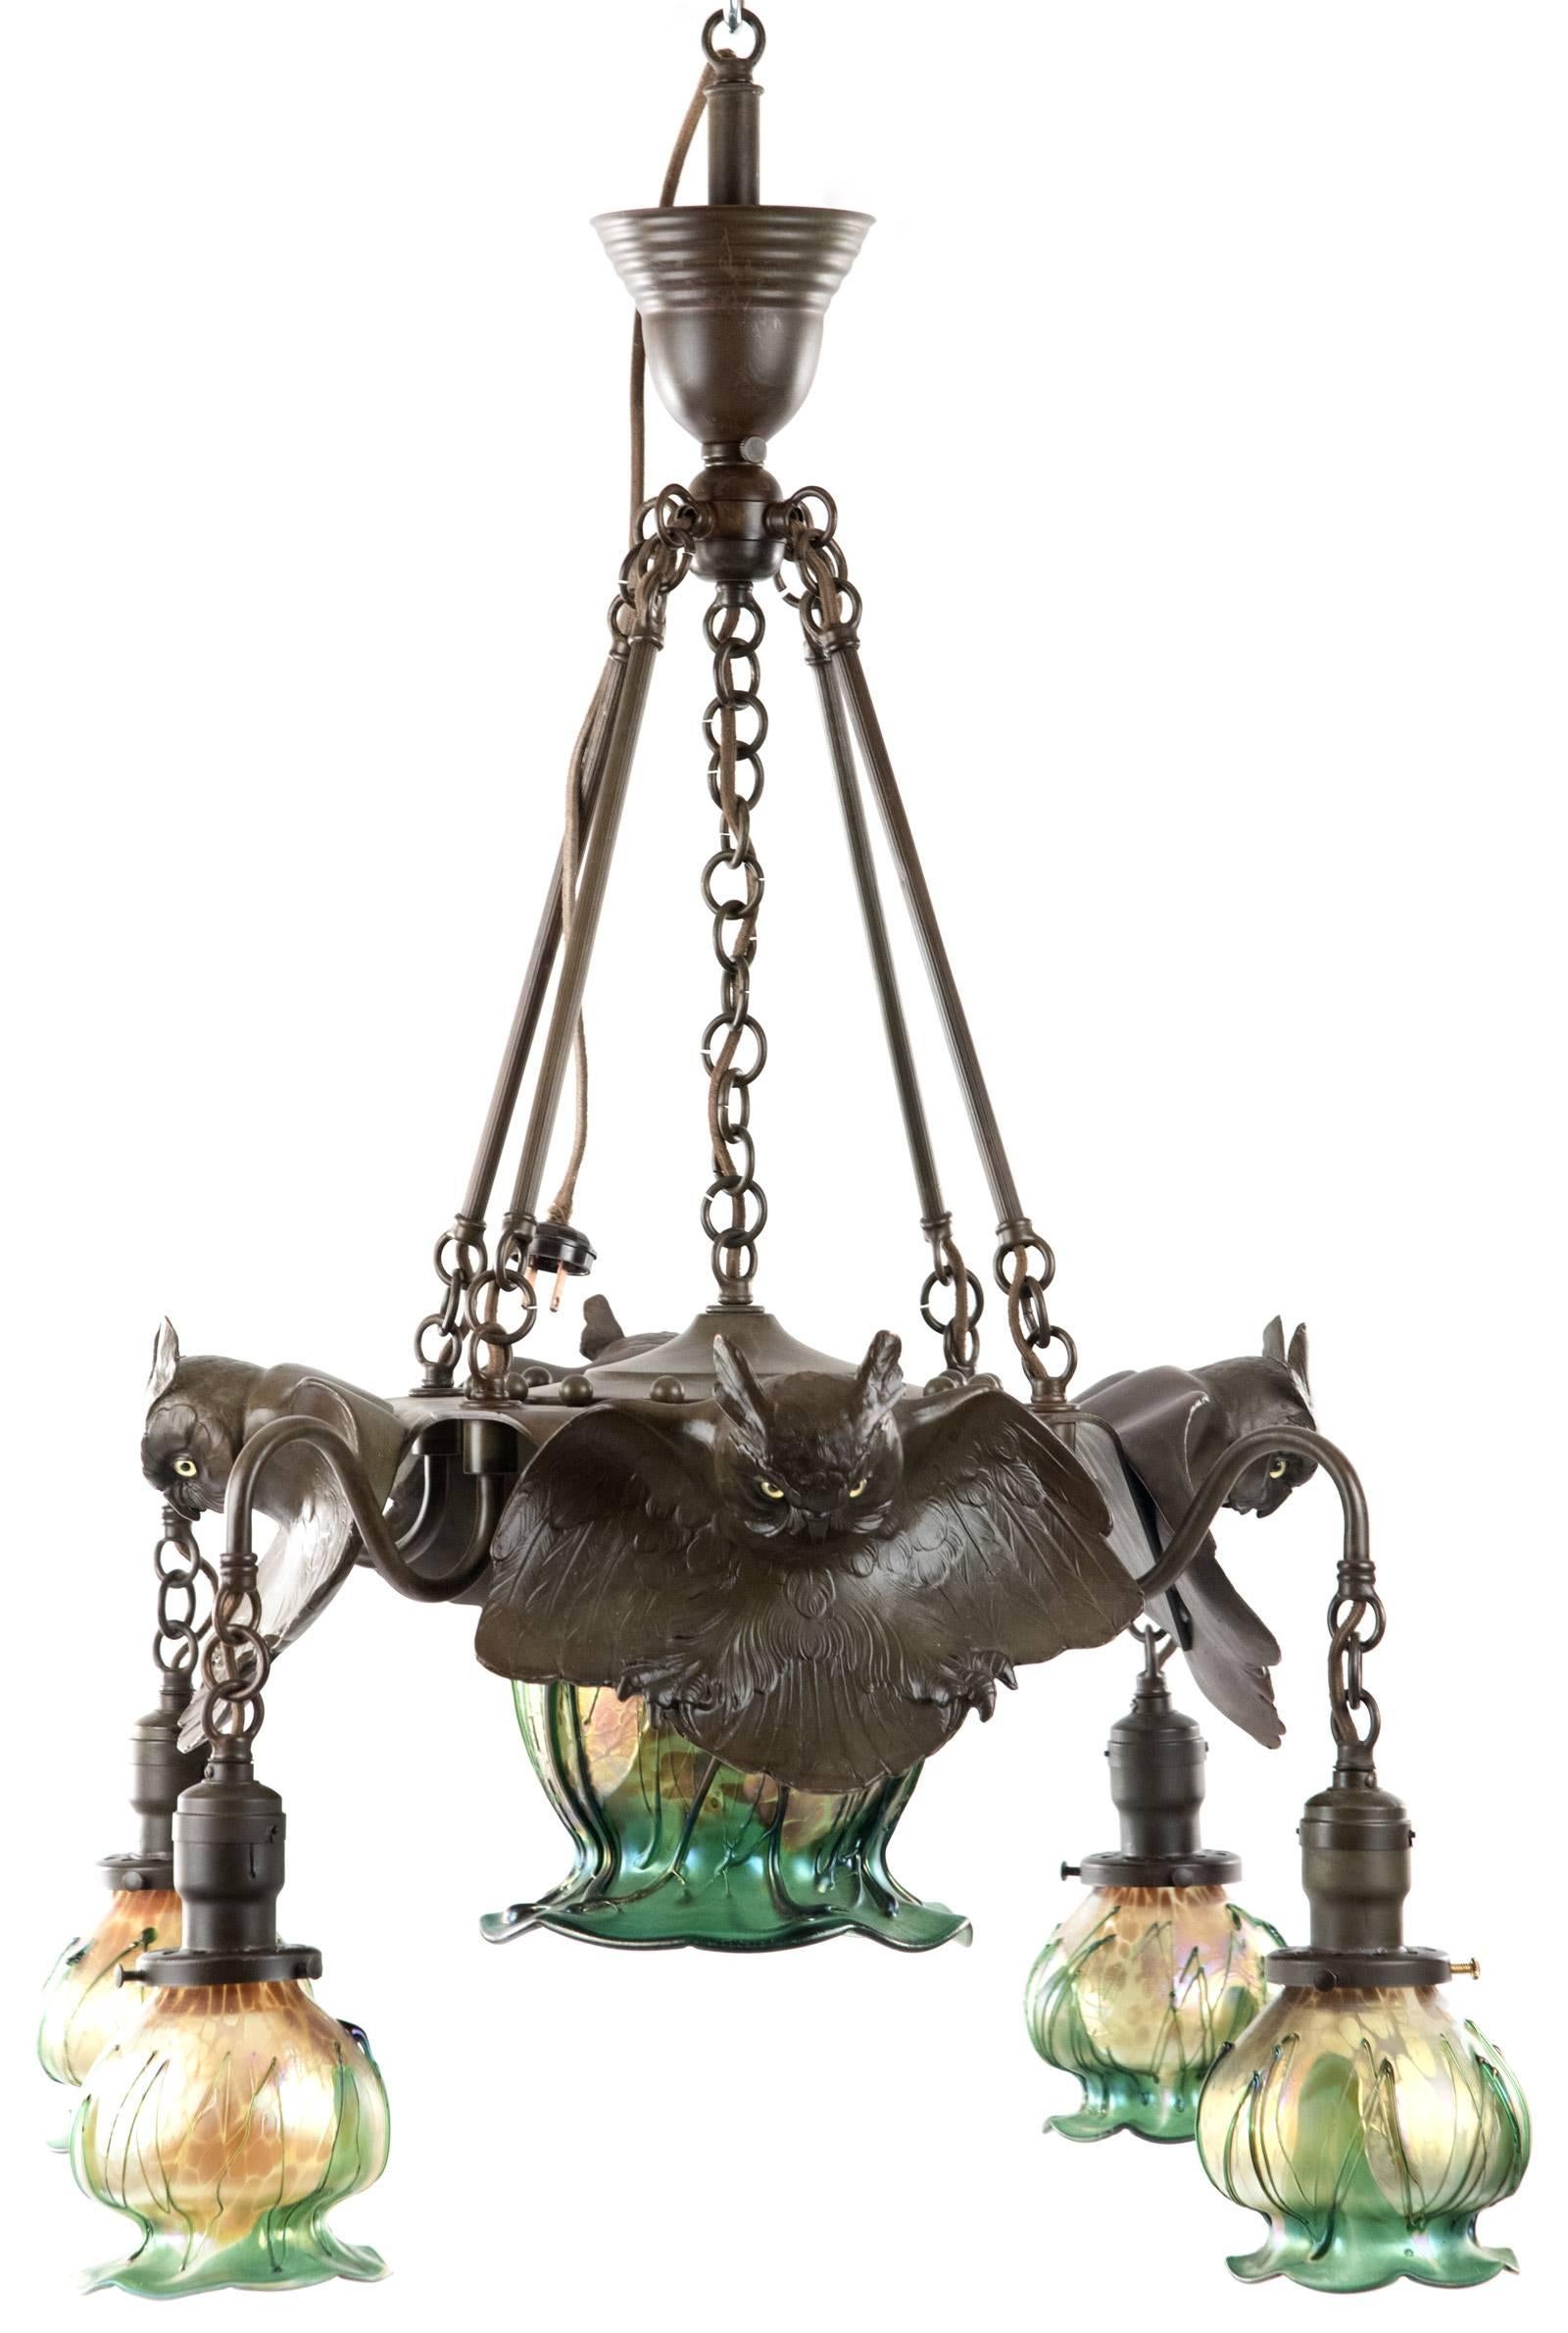 An Art Nouveau style brass chandelier with the hanging support with four mounted and incised owl forms with out-stretched wings and glass eyes, surrounded by four tulip-shaped blown glass shades supported on scrolled arms, above a large central